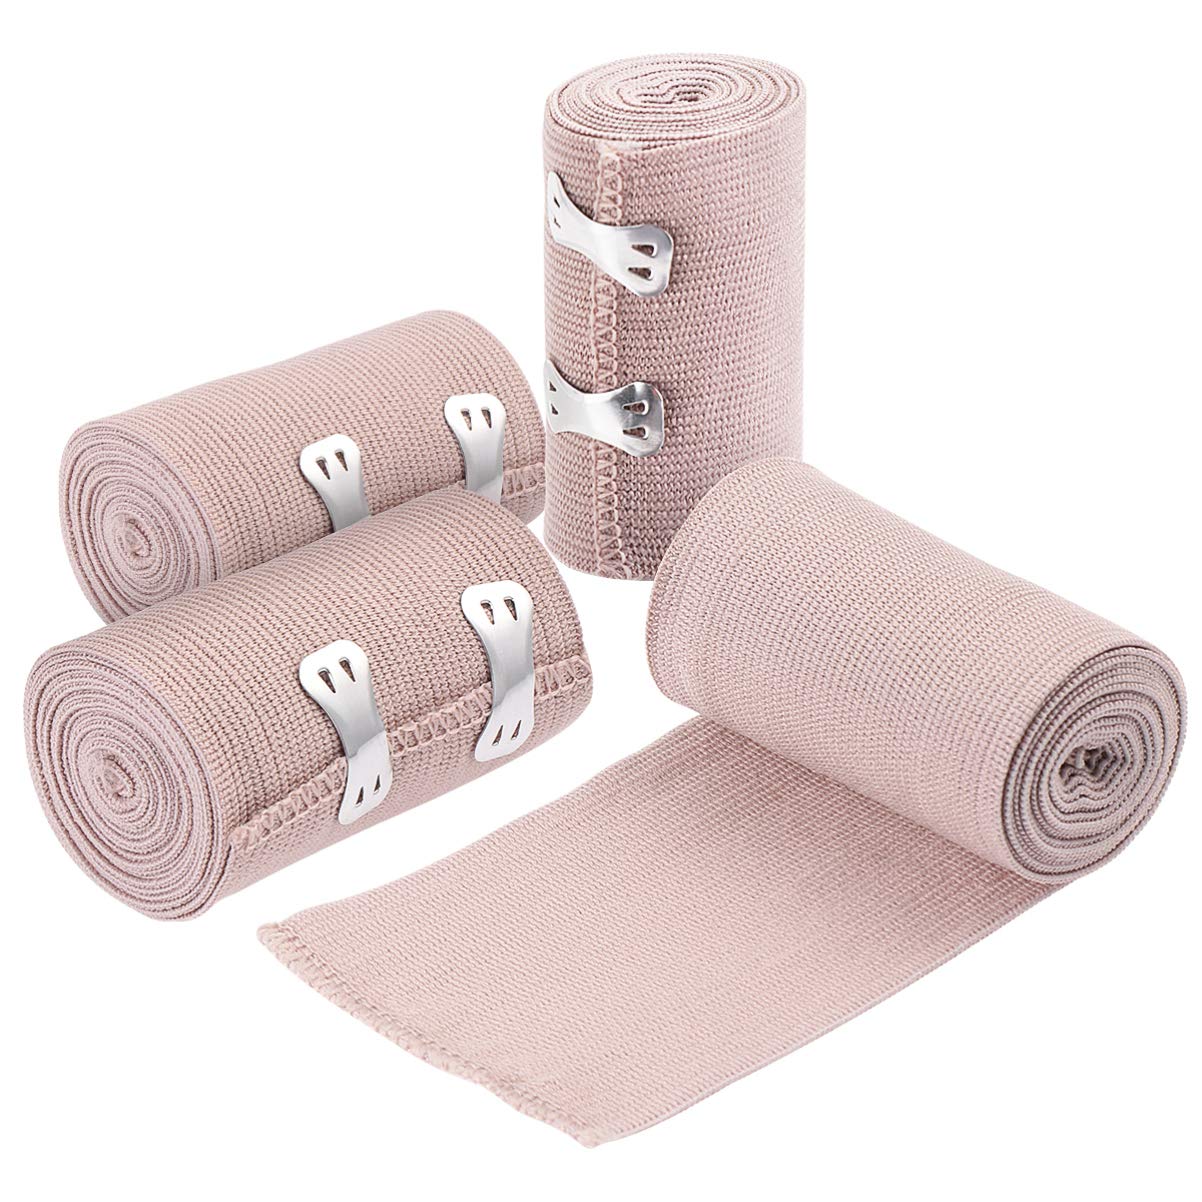 EXCEART Elastic Cotton Compression Band...